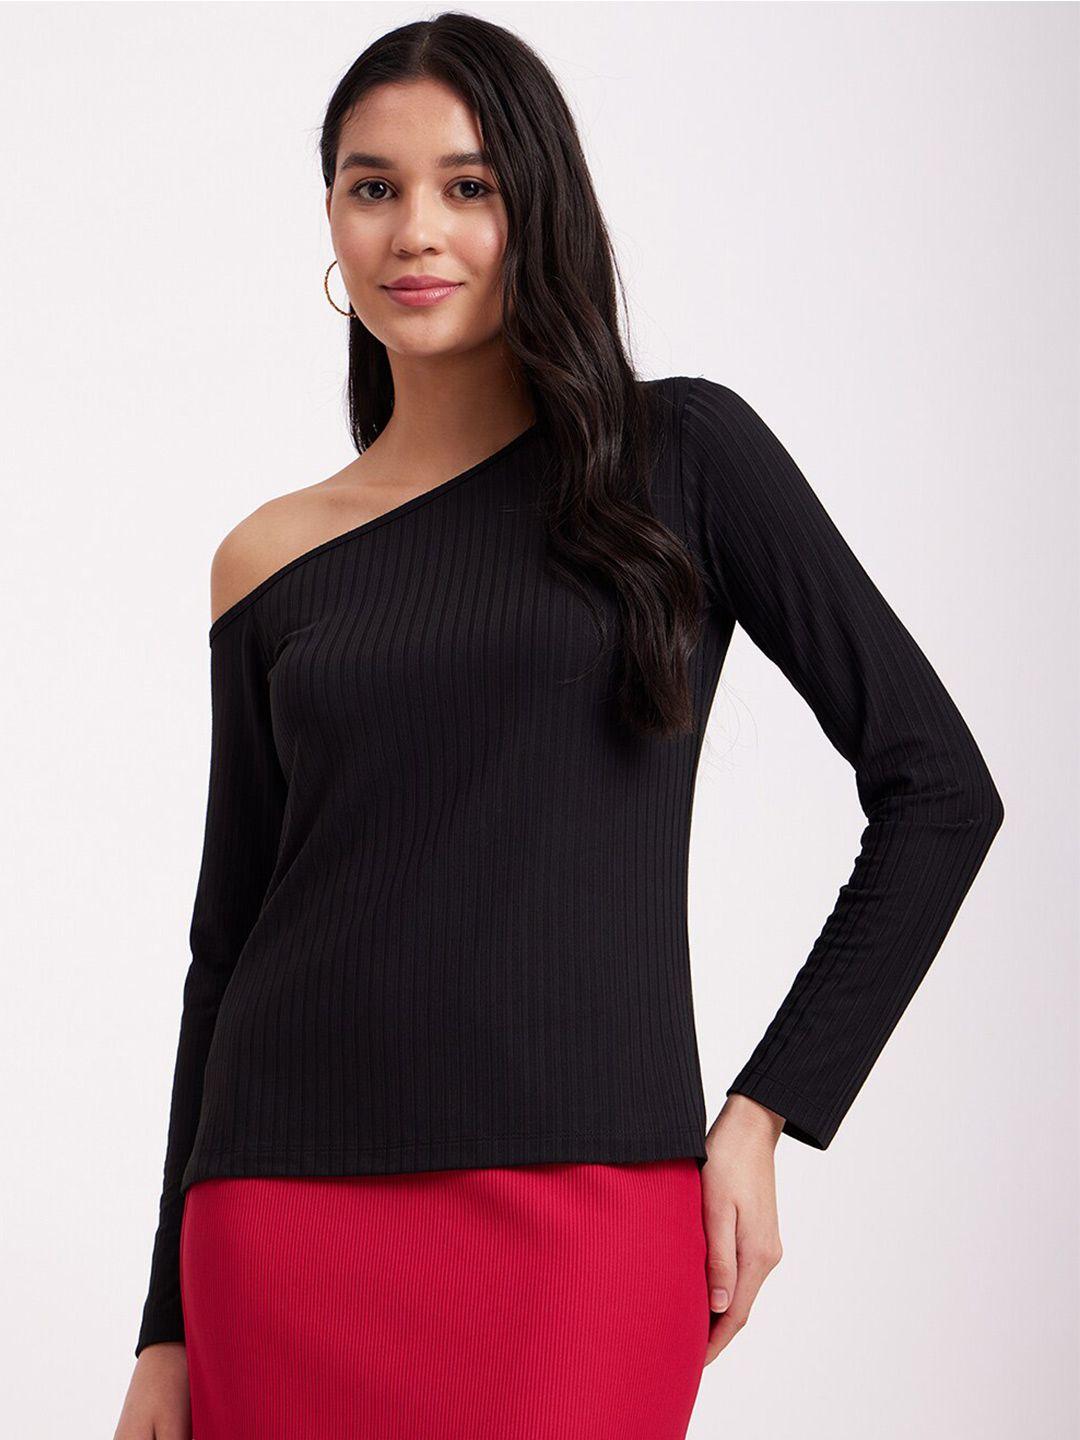 fablestreet one shoulder full sleeve ribbed top